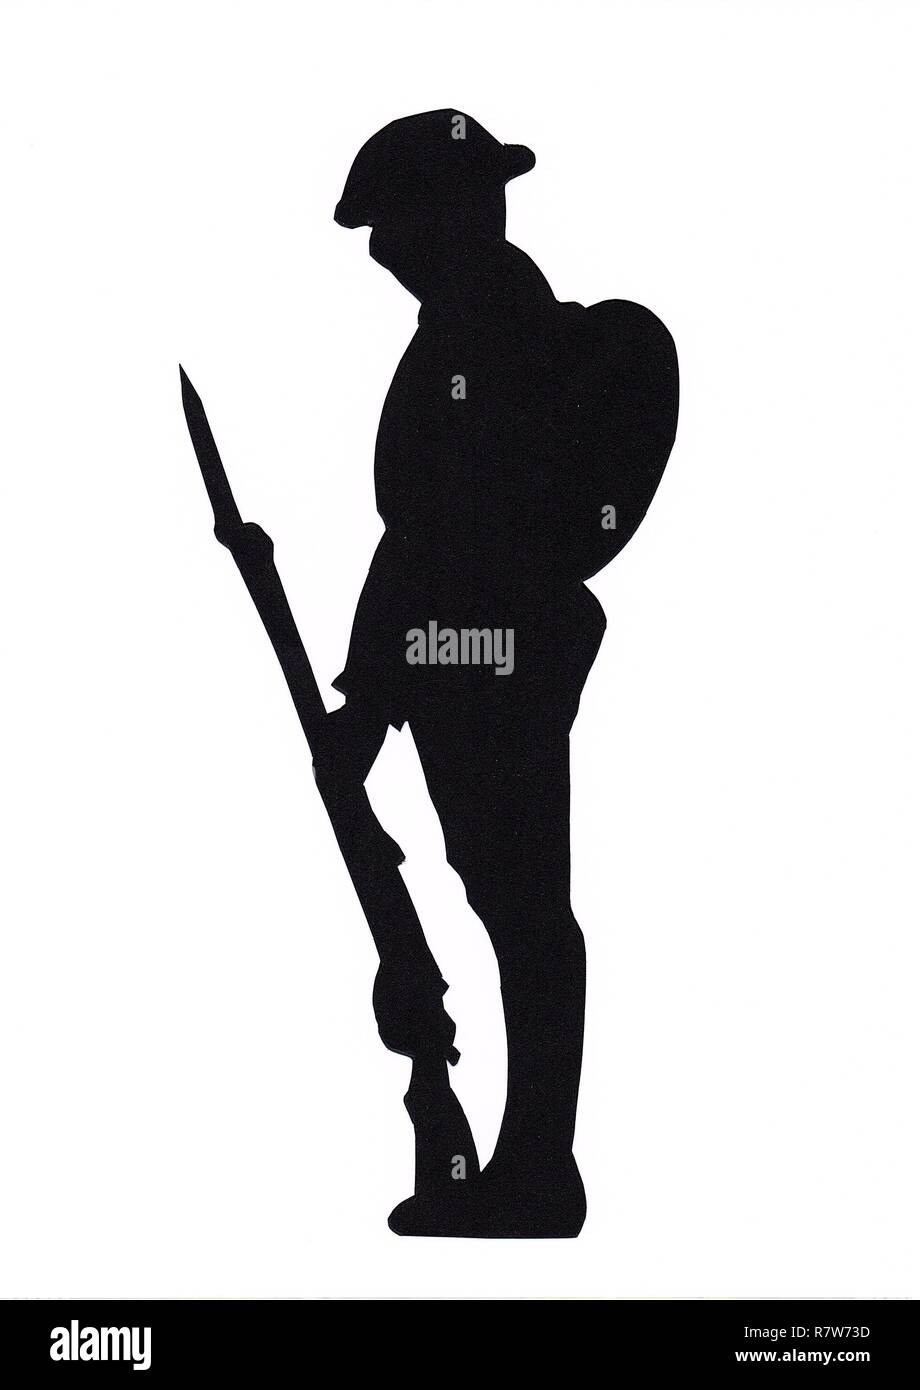 WW1, Soldier in Silhouette, British, Commonwealth, American GI, Tommy,   ANZAC, Great War, Remember, Ceremony, Armed Forces, Memorial, Army. Stock Photo